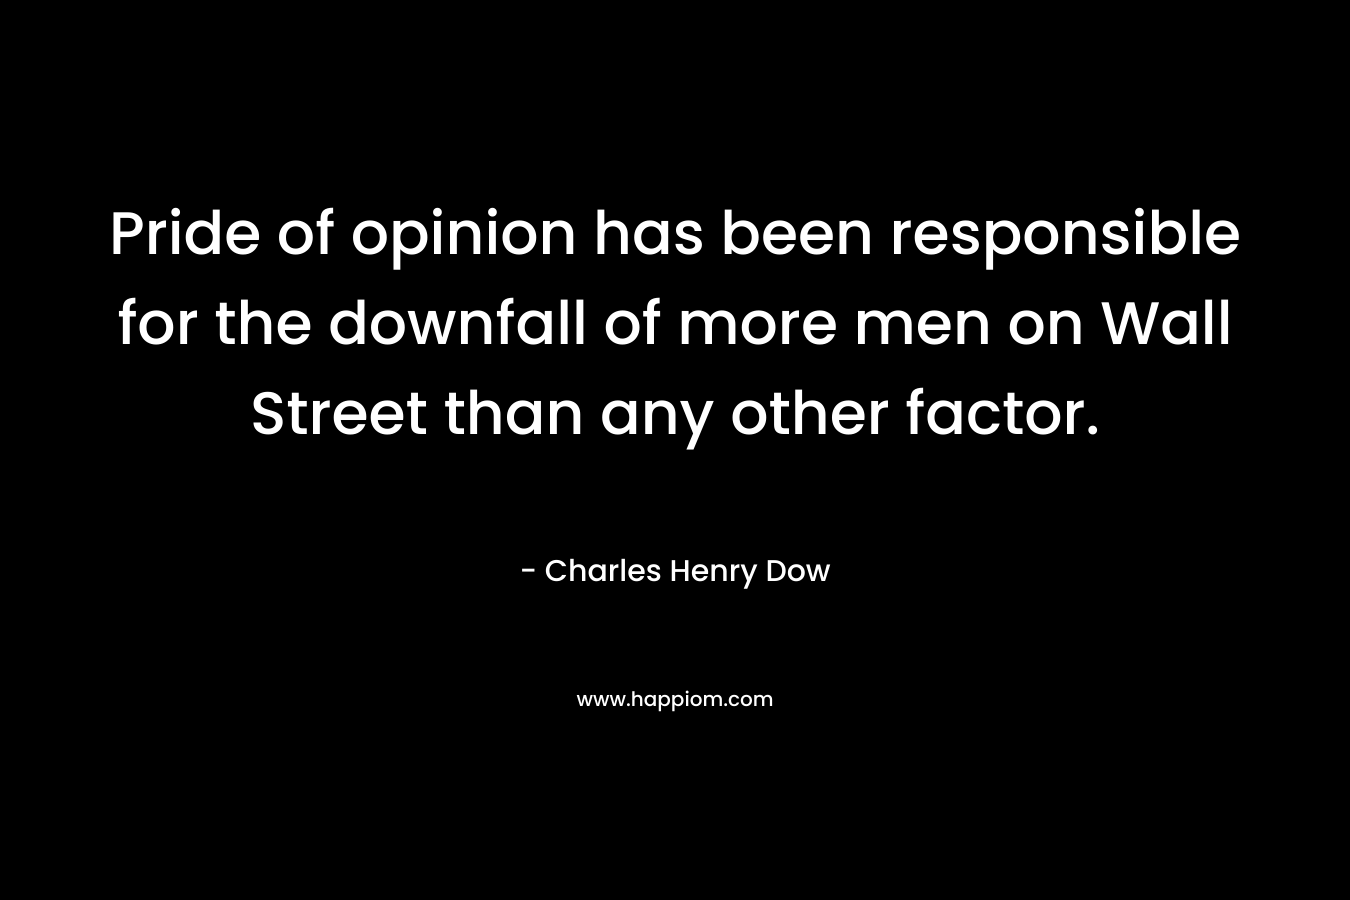 Pride of opinion has been responsible for the downfall of more men on Wall Street than any other factor.